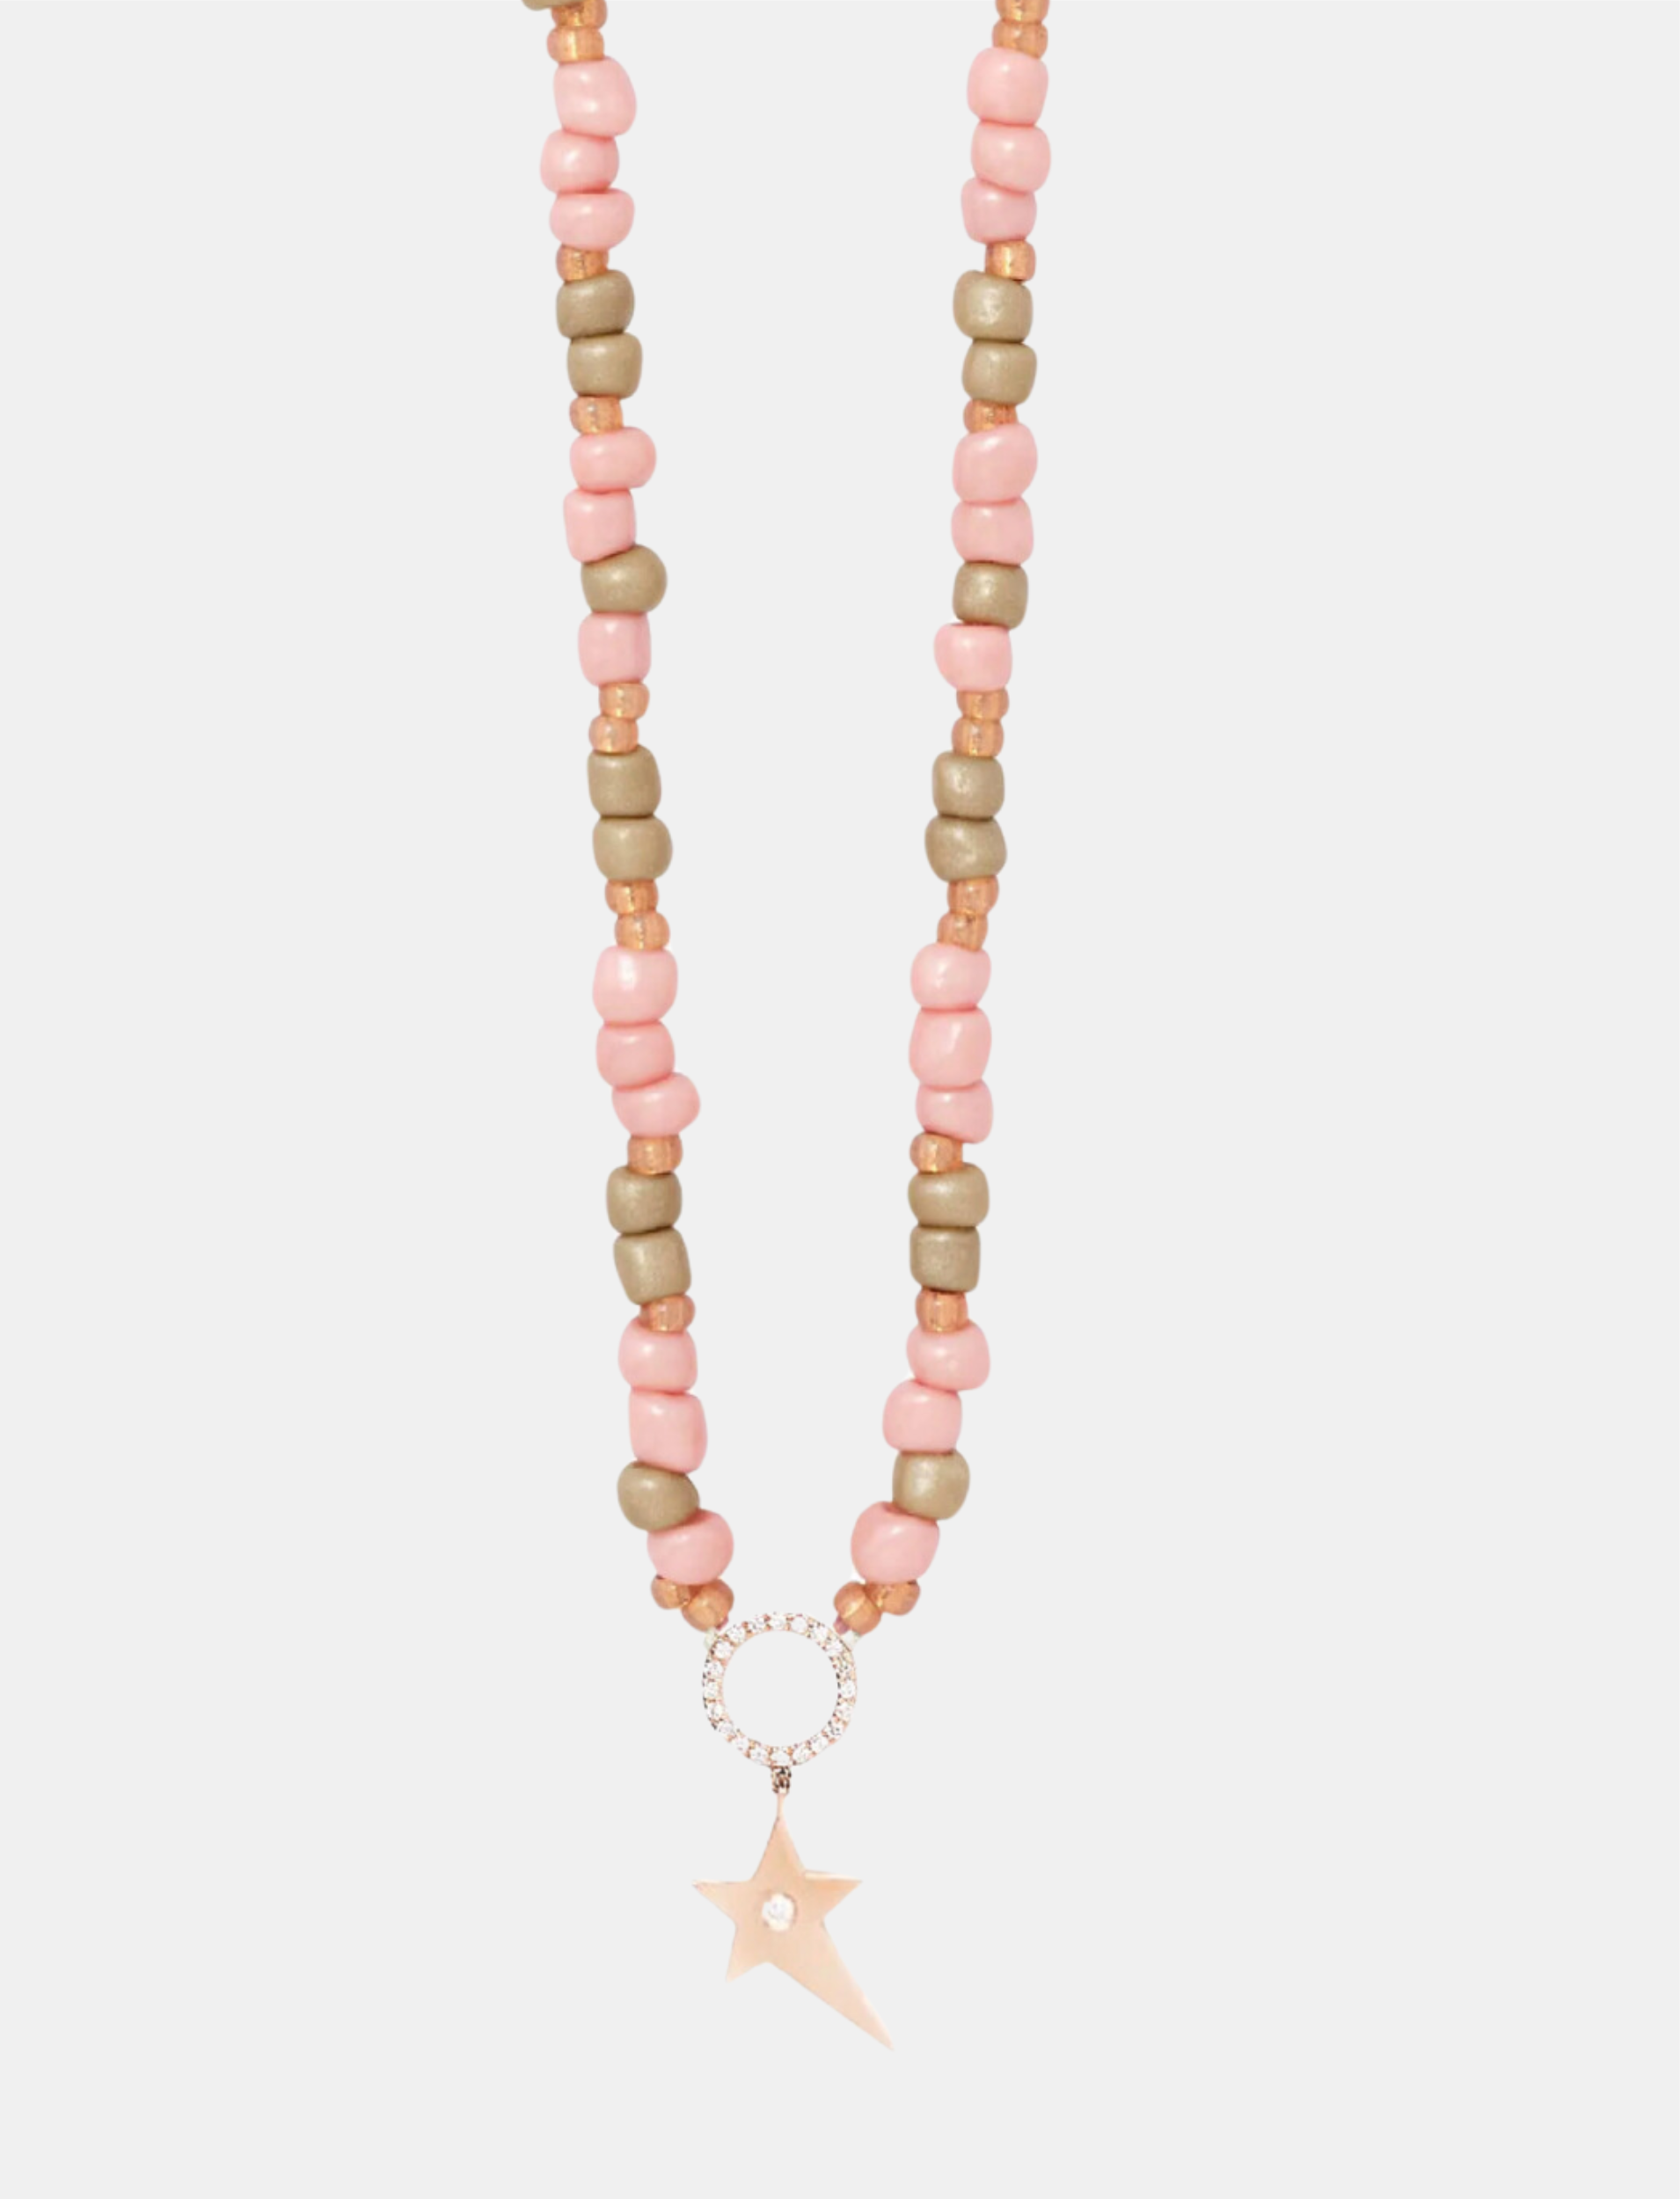 Star Hippie Necklace with Dusty Pink Beads